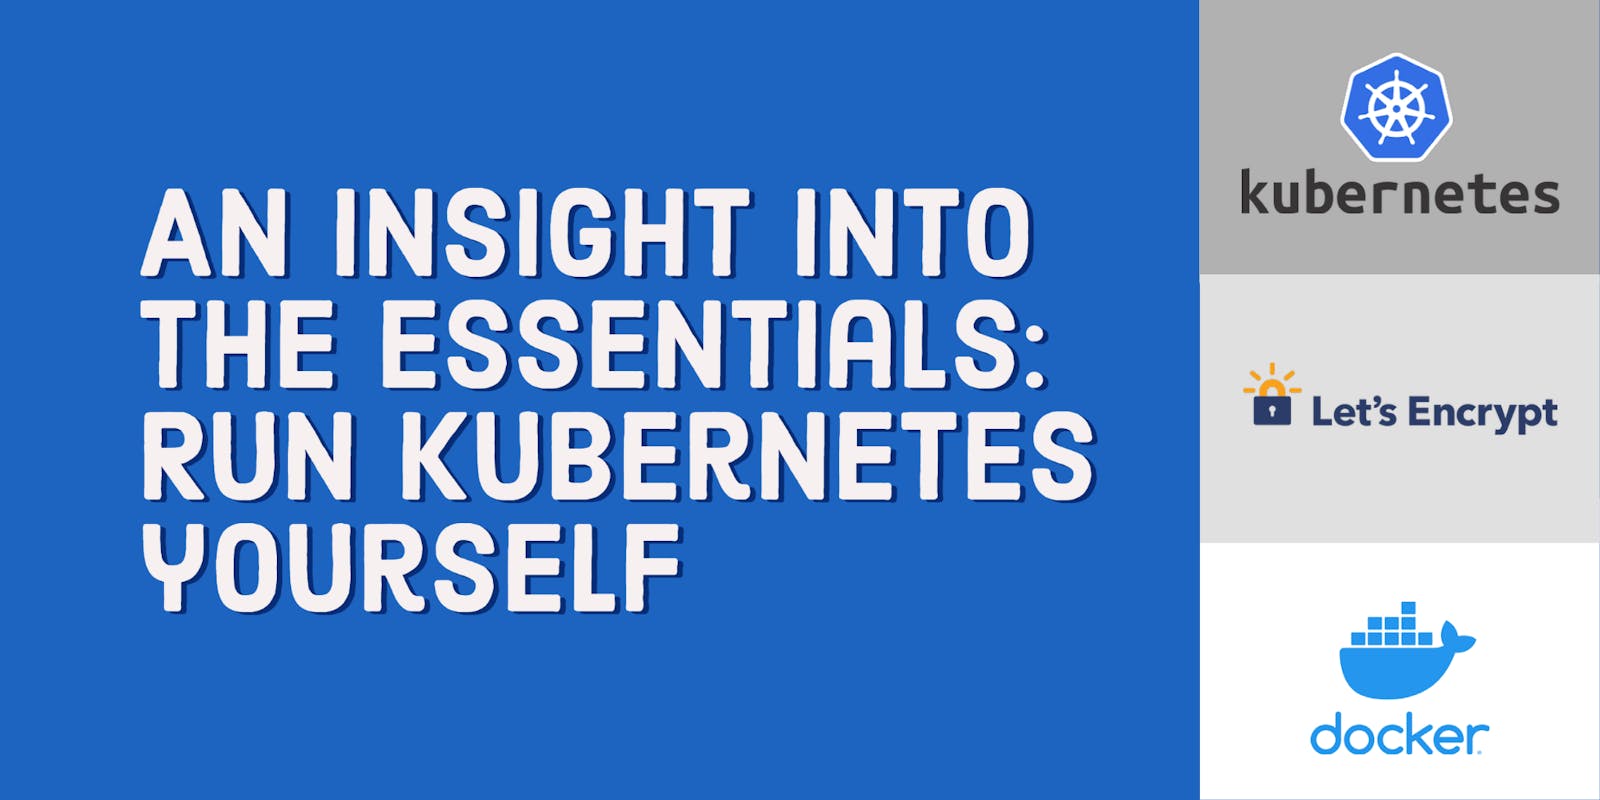 An insight into the essentials: Run Kubernetes yourself